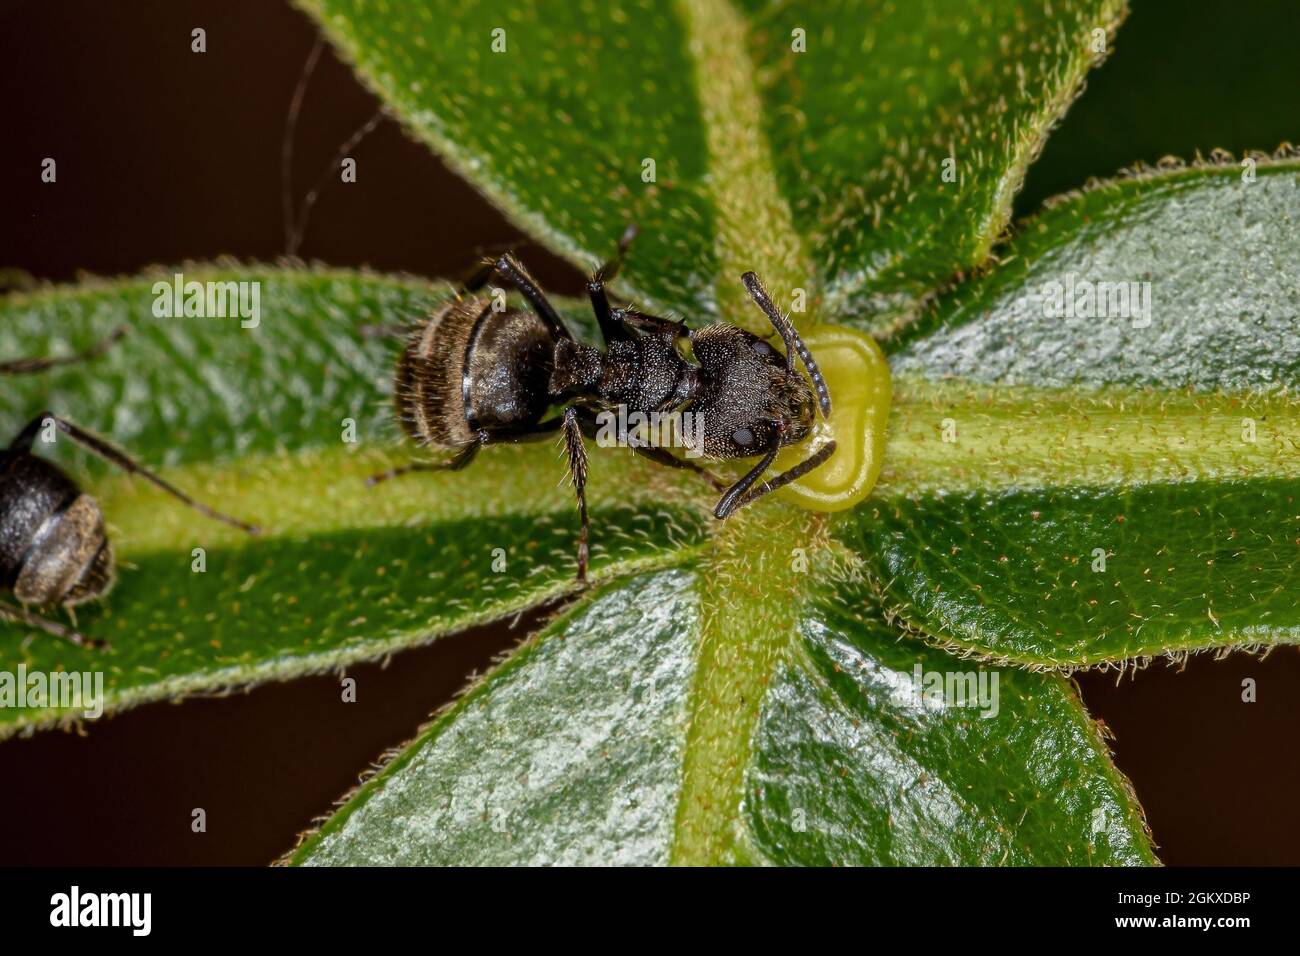 Adult Odorous Ant of the species Dolichoderus bispinosus eating on the extrafloral nectary of a plant Stock Photo